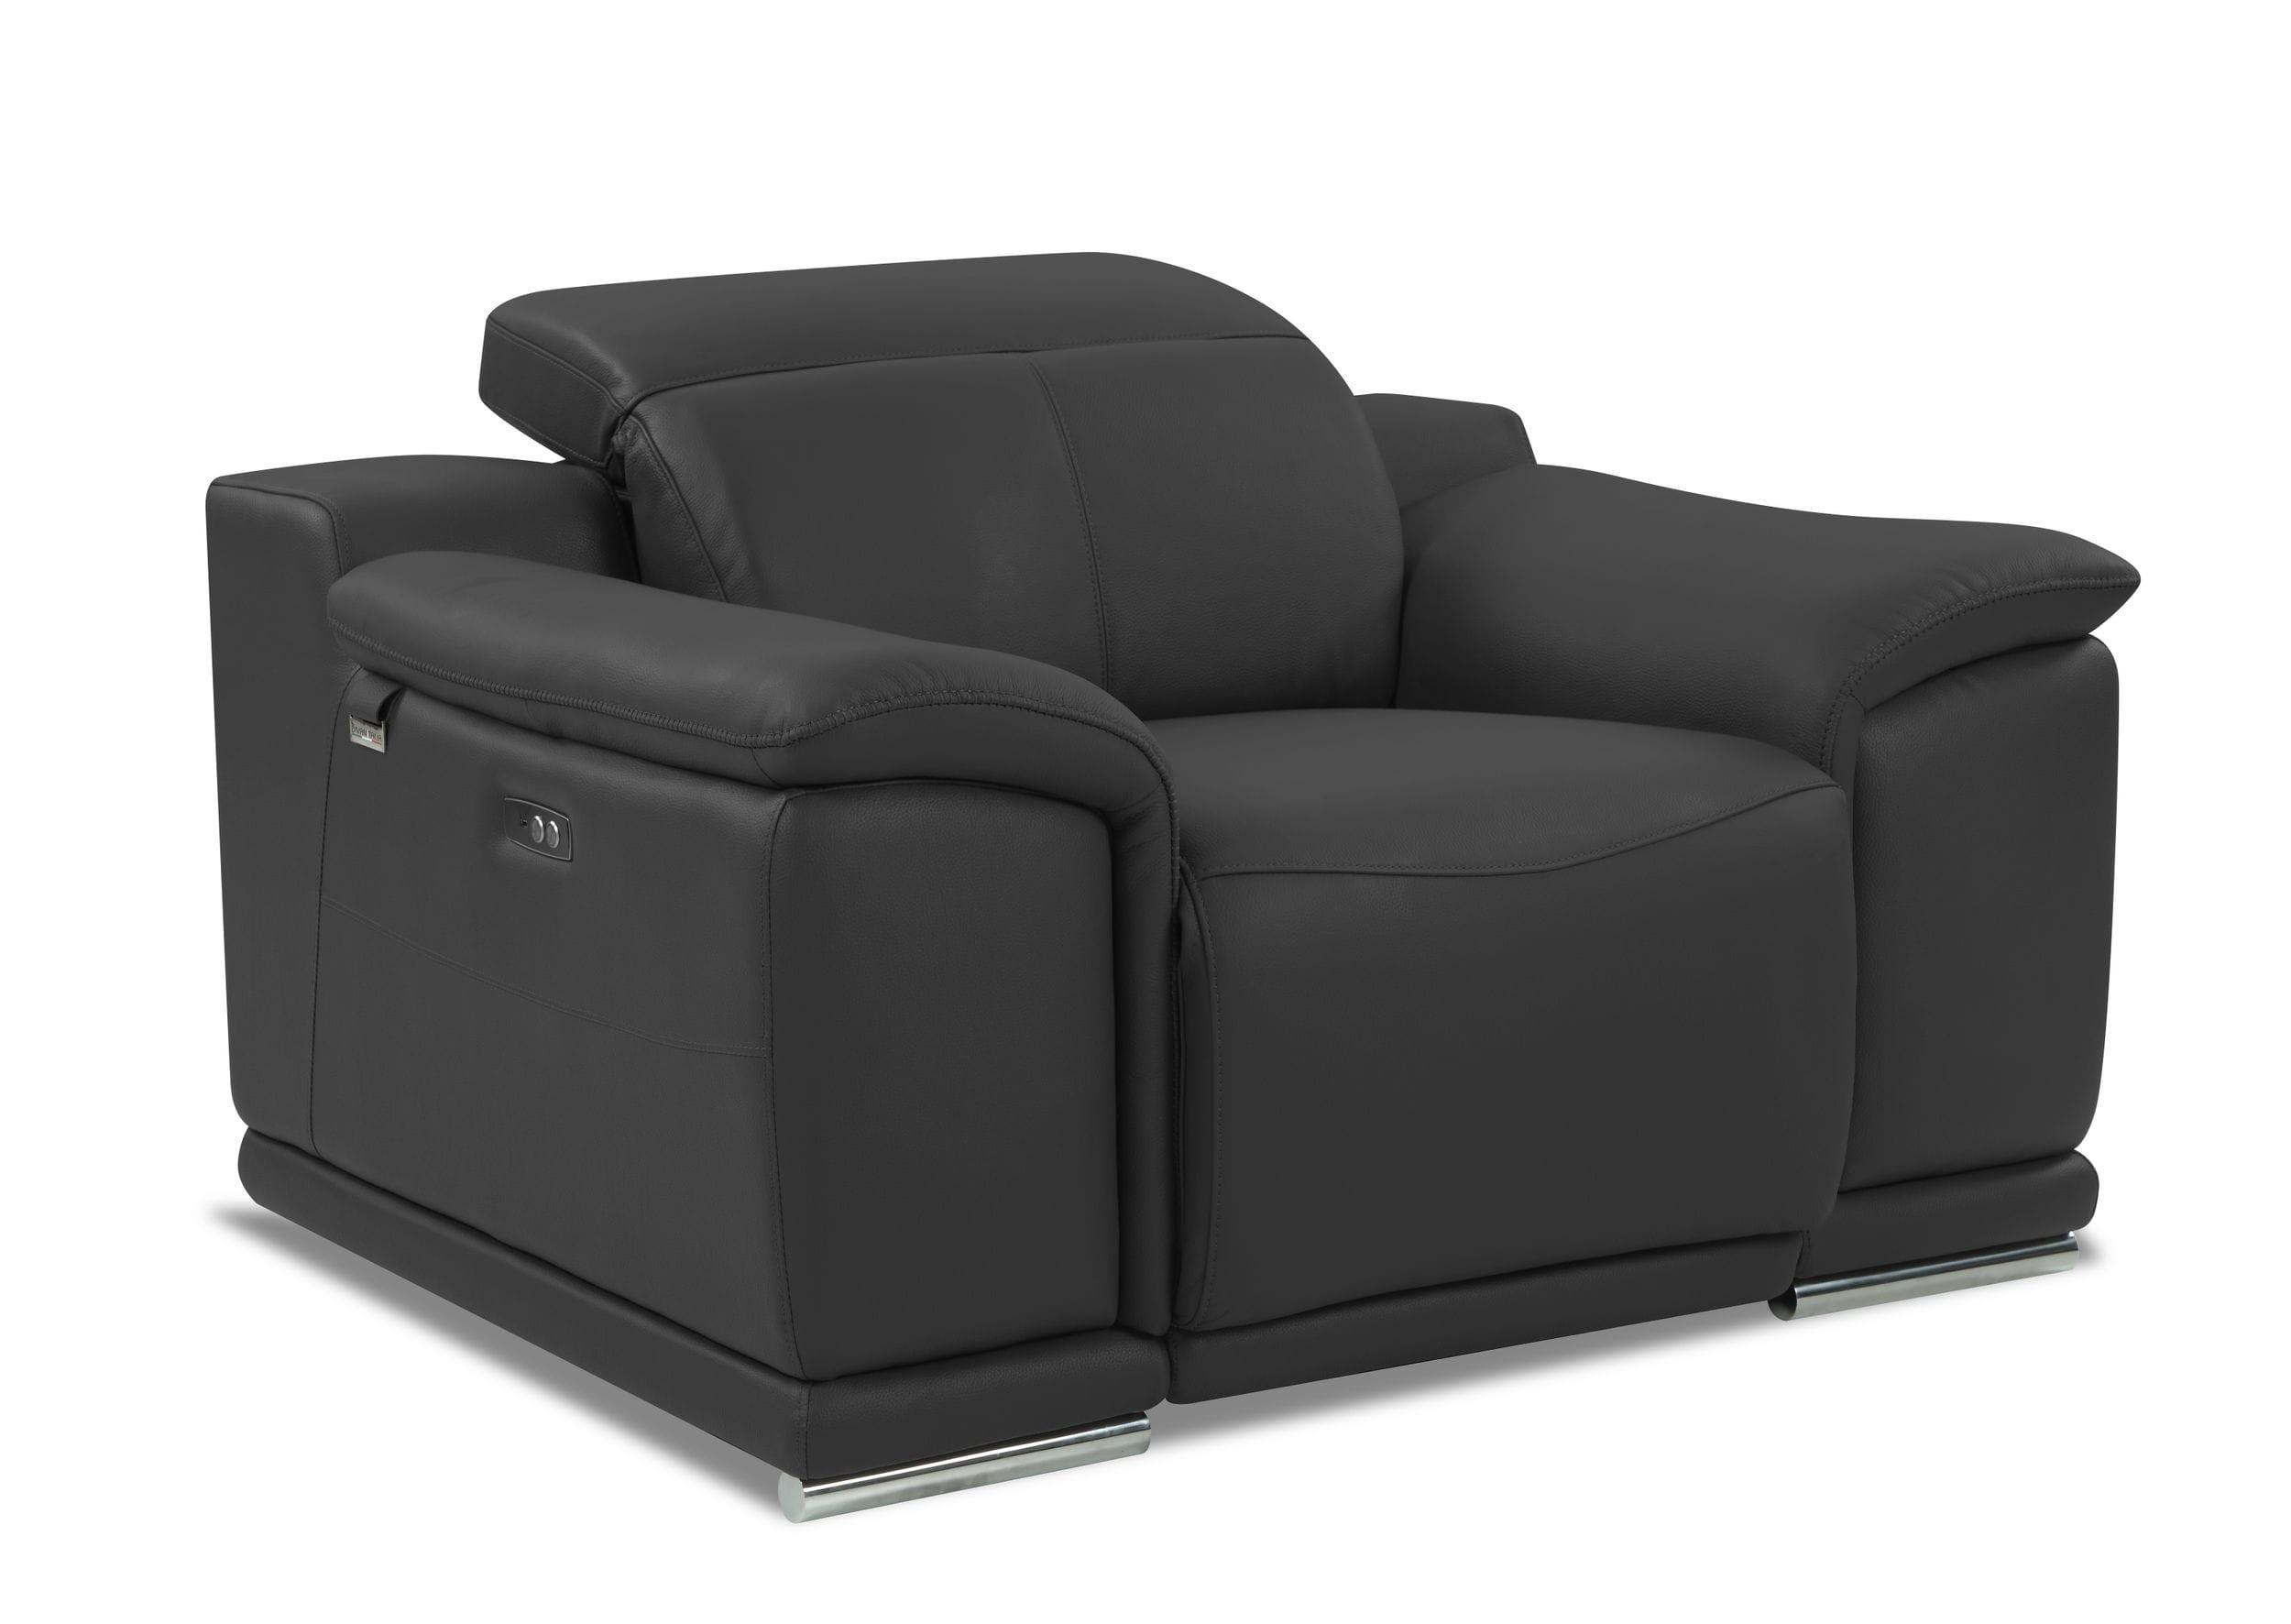 Contemporary Reclining Chair 9762 9762-DARK_GRAY-CH in Dark Gray Leather Match